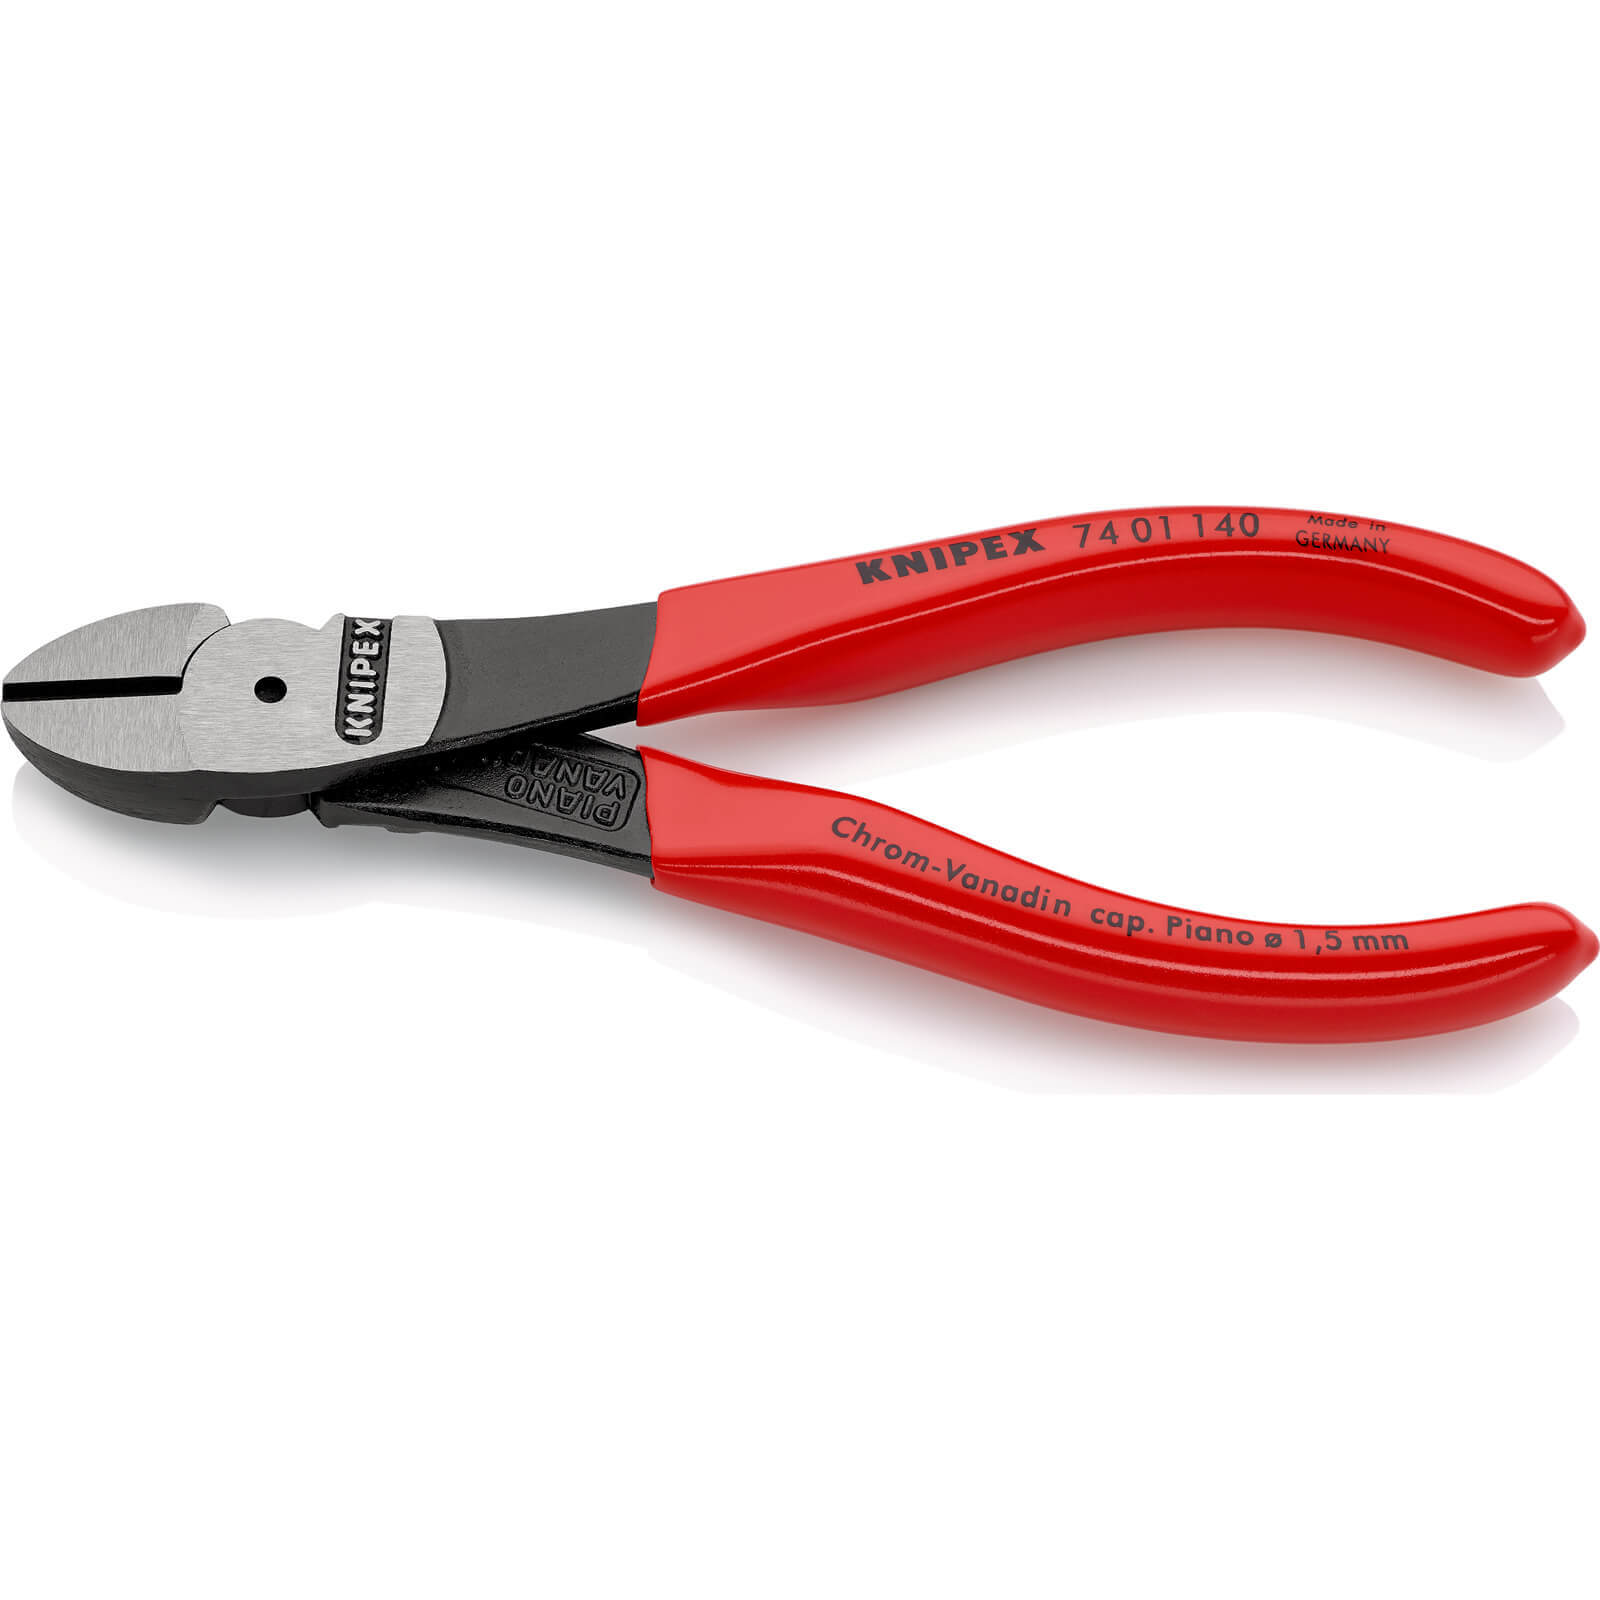 Photo of Knipex 74 01 High Leverage Diagonal Cutting Pliers 140mm